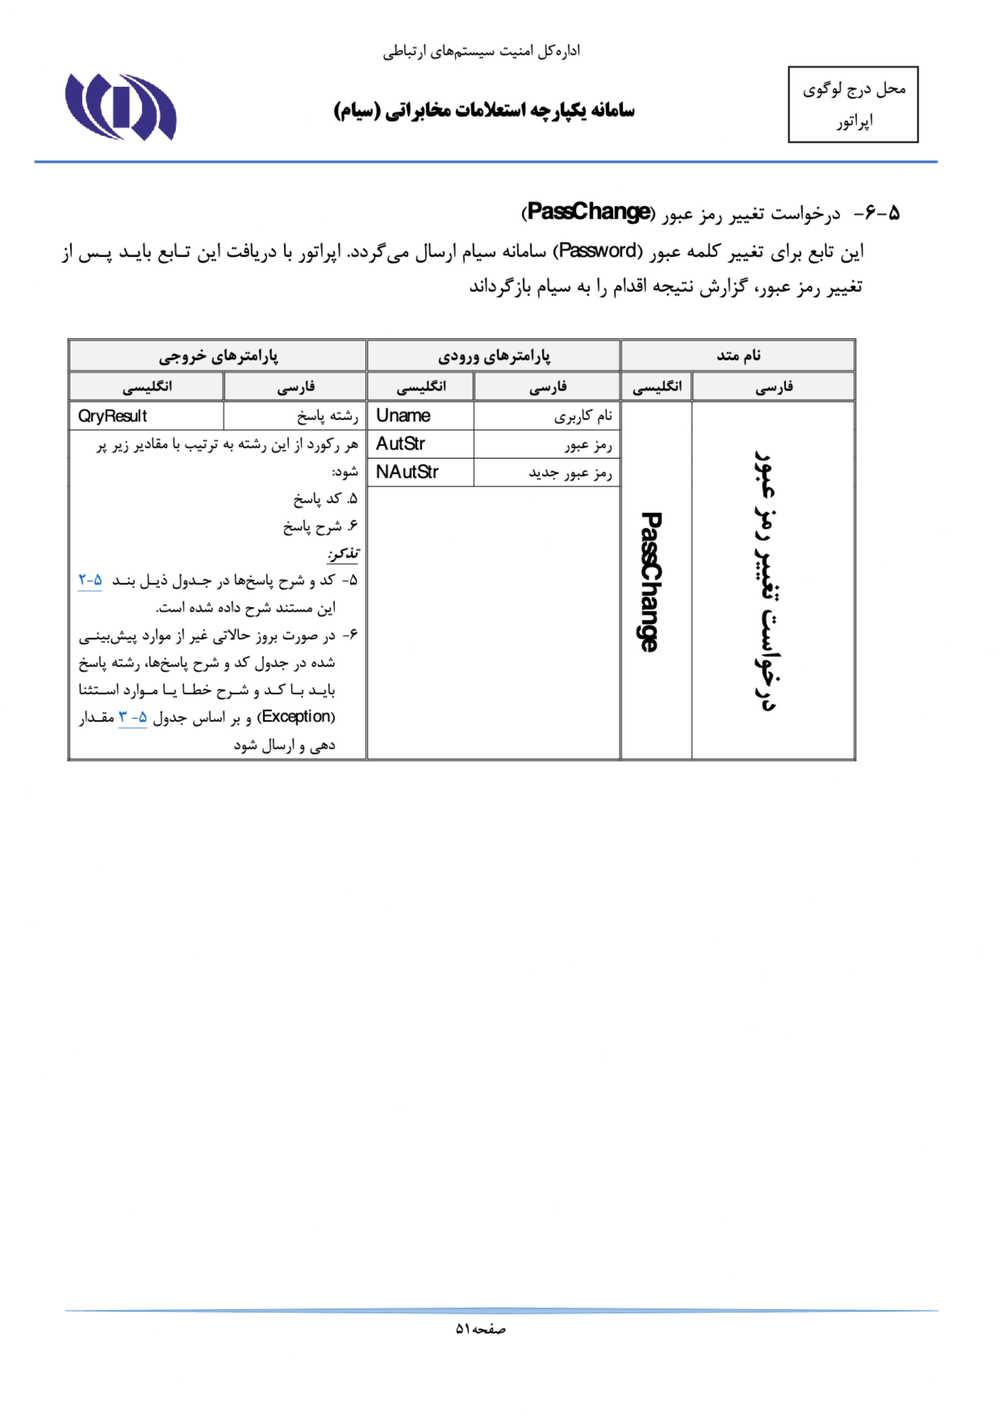 Page 51 from Iran’s SIAM Manual in Persian for Tracking and Controlling Mobile Phones